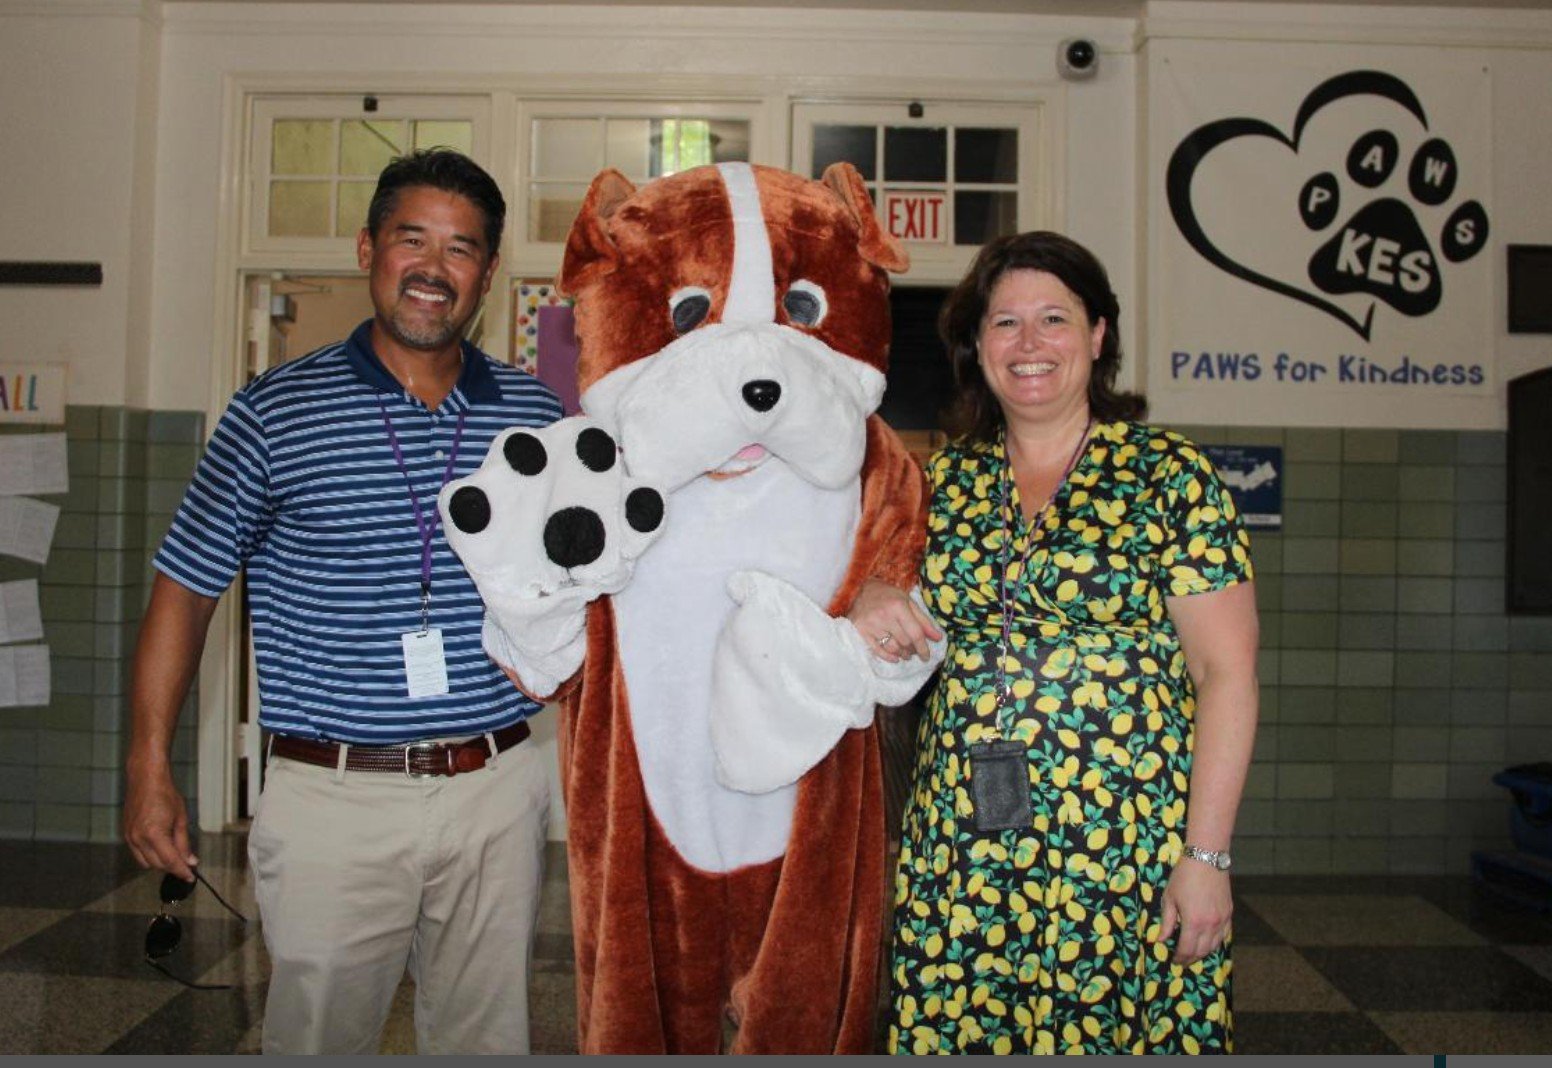 We would like to recognize Mrs. Harris and Mr. Stambaugh on #PrincipalAppreciationDay! They work hard to keep our school running smoothly and support students and staff. You're PAWSOME, thanks for all that you do!